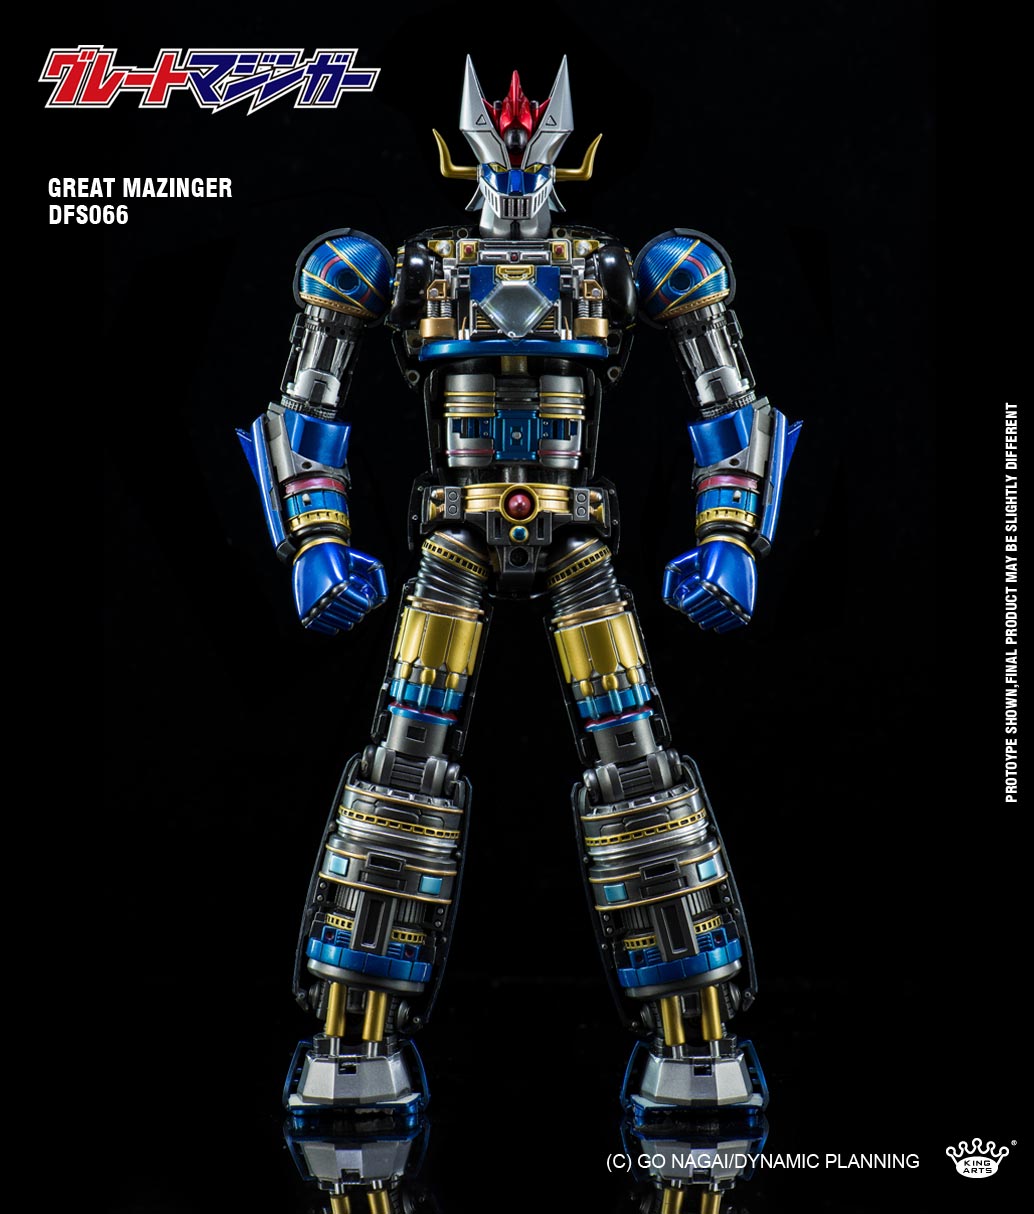 King Arts - DFS066 - Dynamic Planning - Diecast Action Great Mazinger